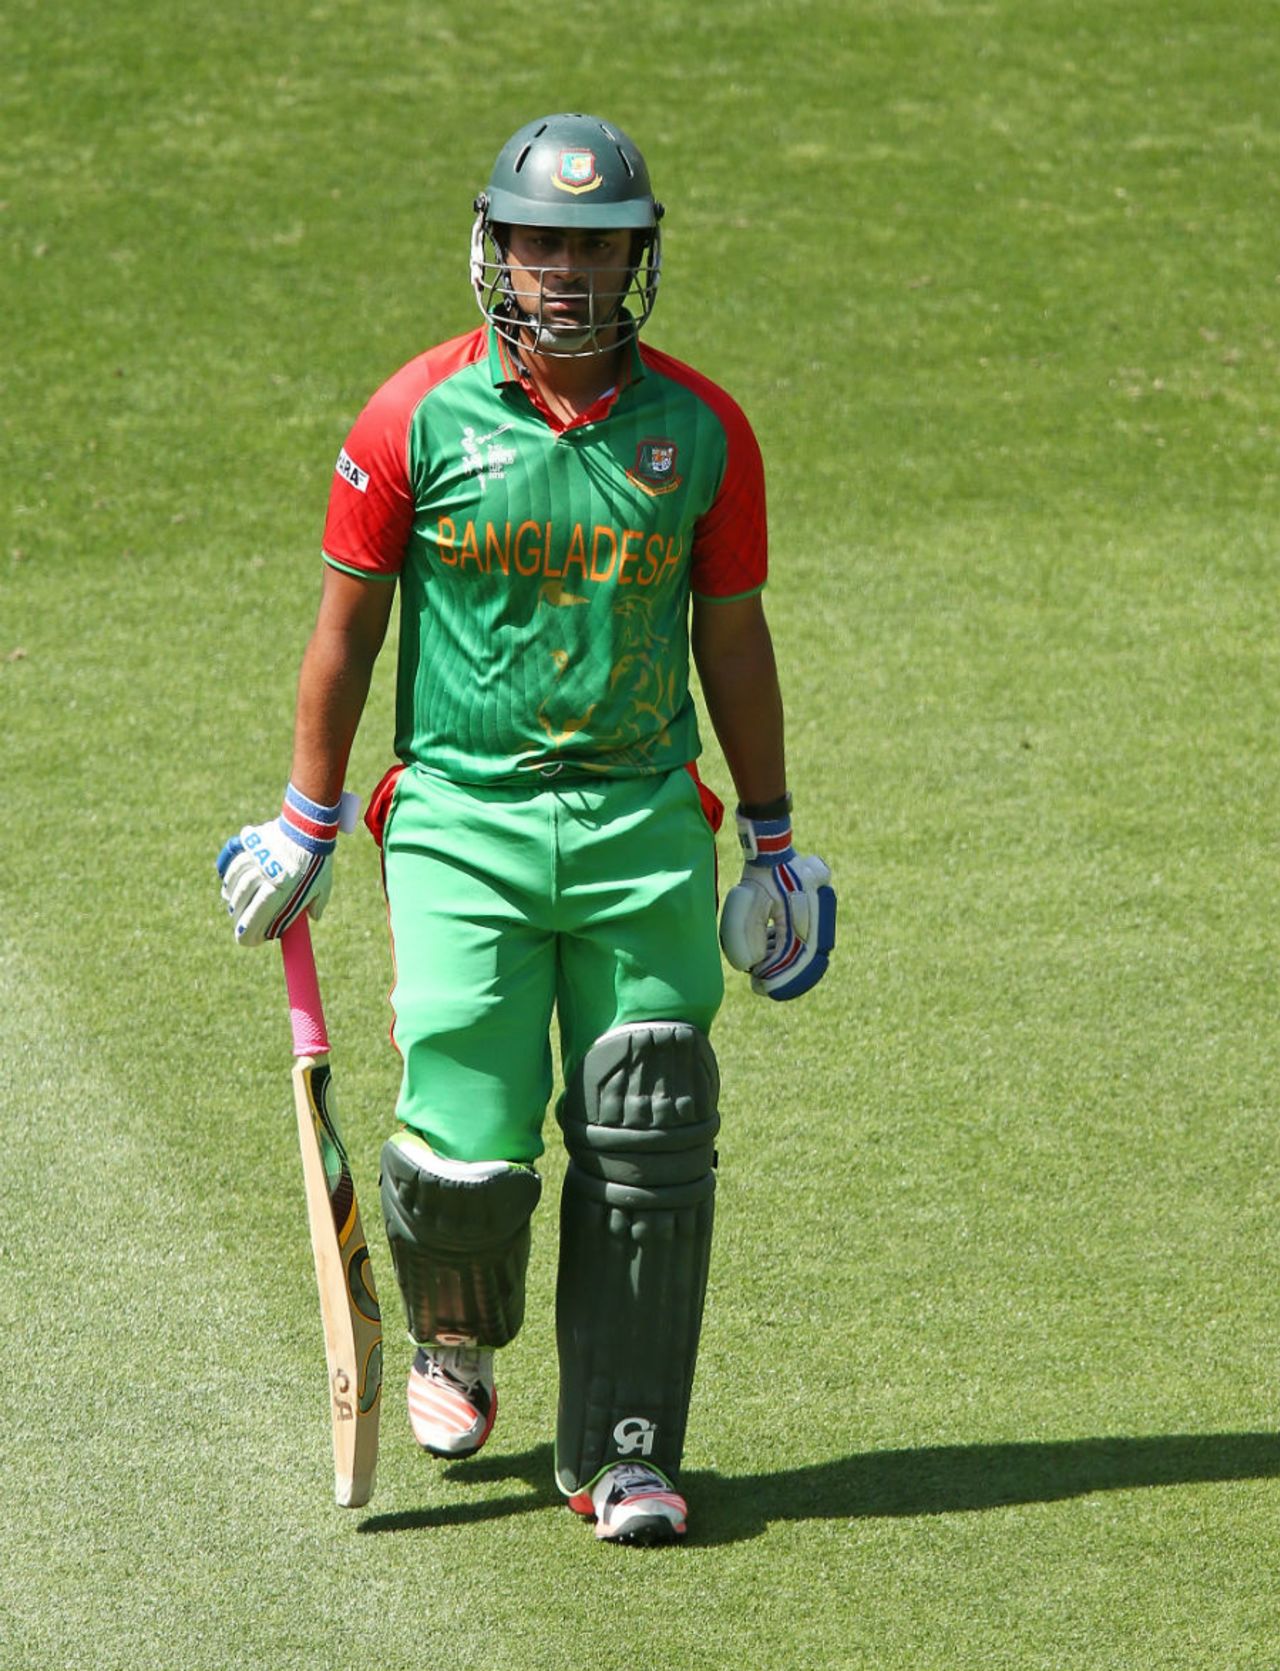 Tamim Iqbal walks off after being dismissed for 2, England v Bangladesh, World Cup 2015, Group A, Adelaide, March 9, 2015